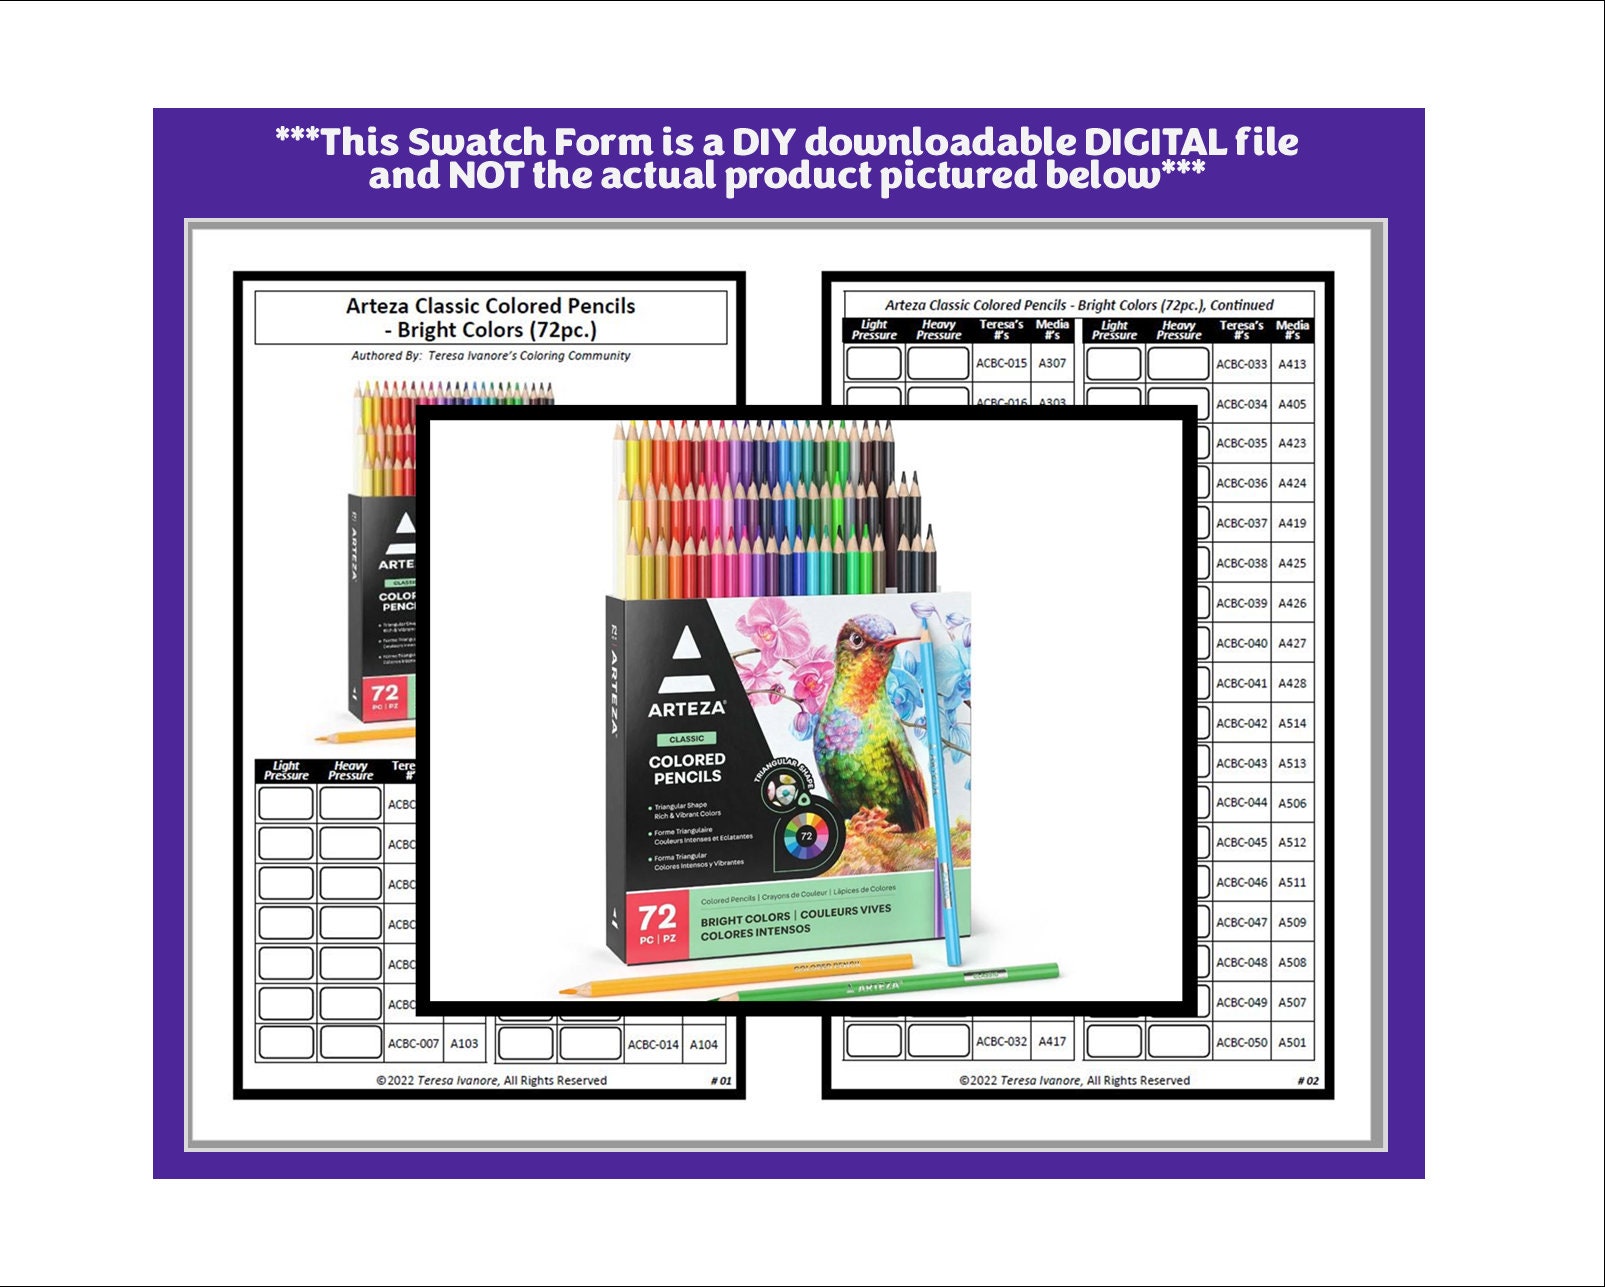 Arteza Everblend Alcohol Markers 60pc. Color Wheel Set by Teresa Ivanore 